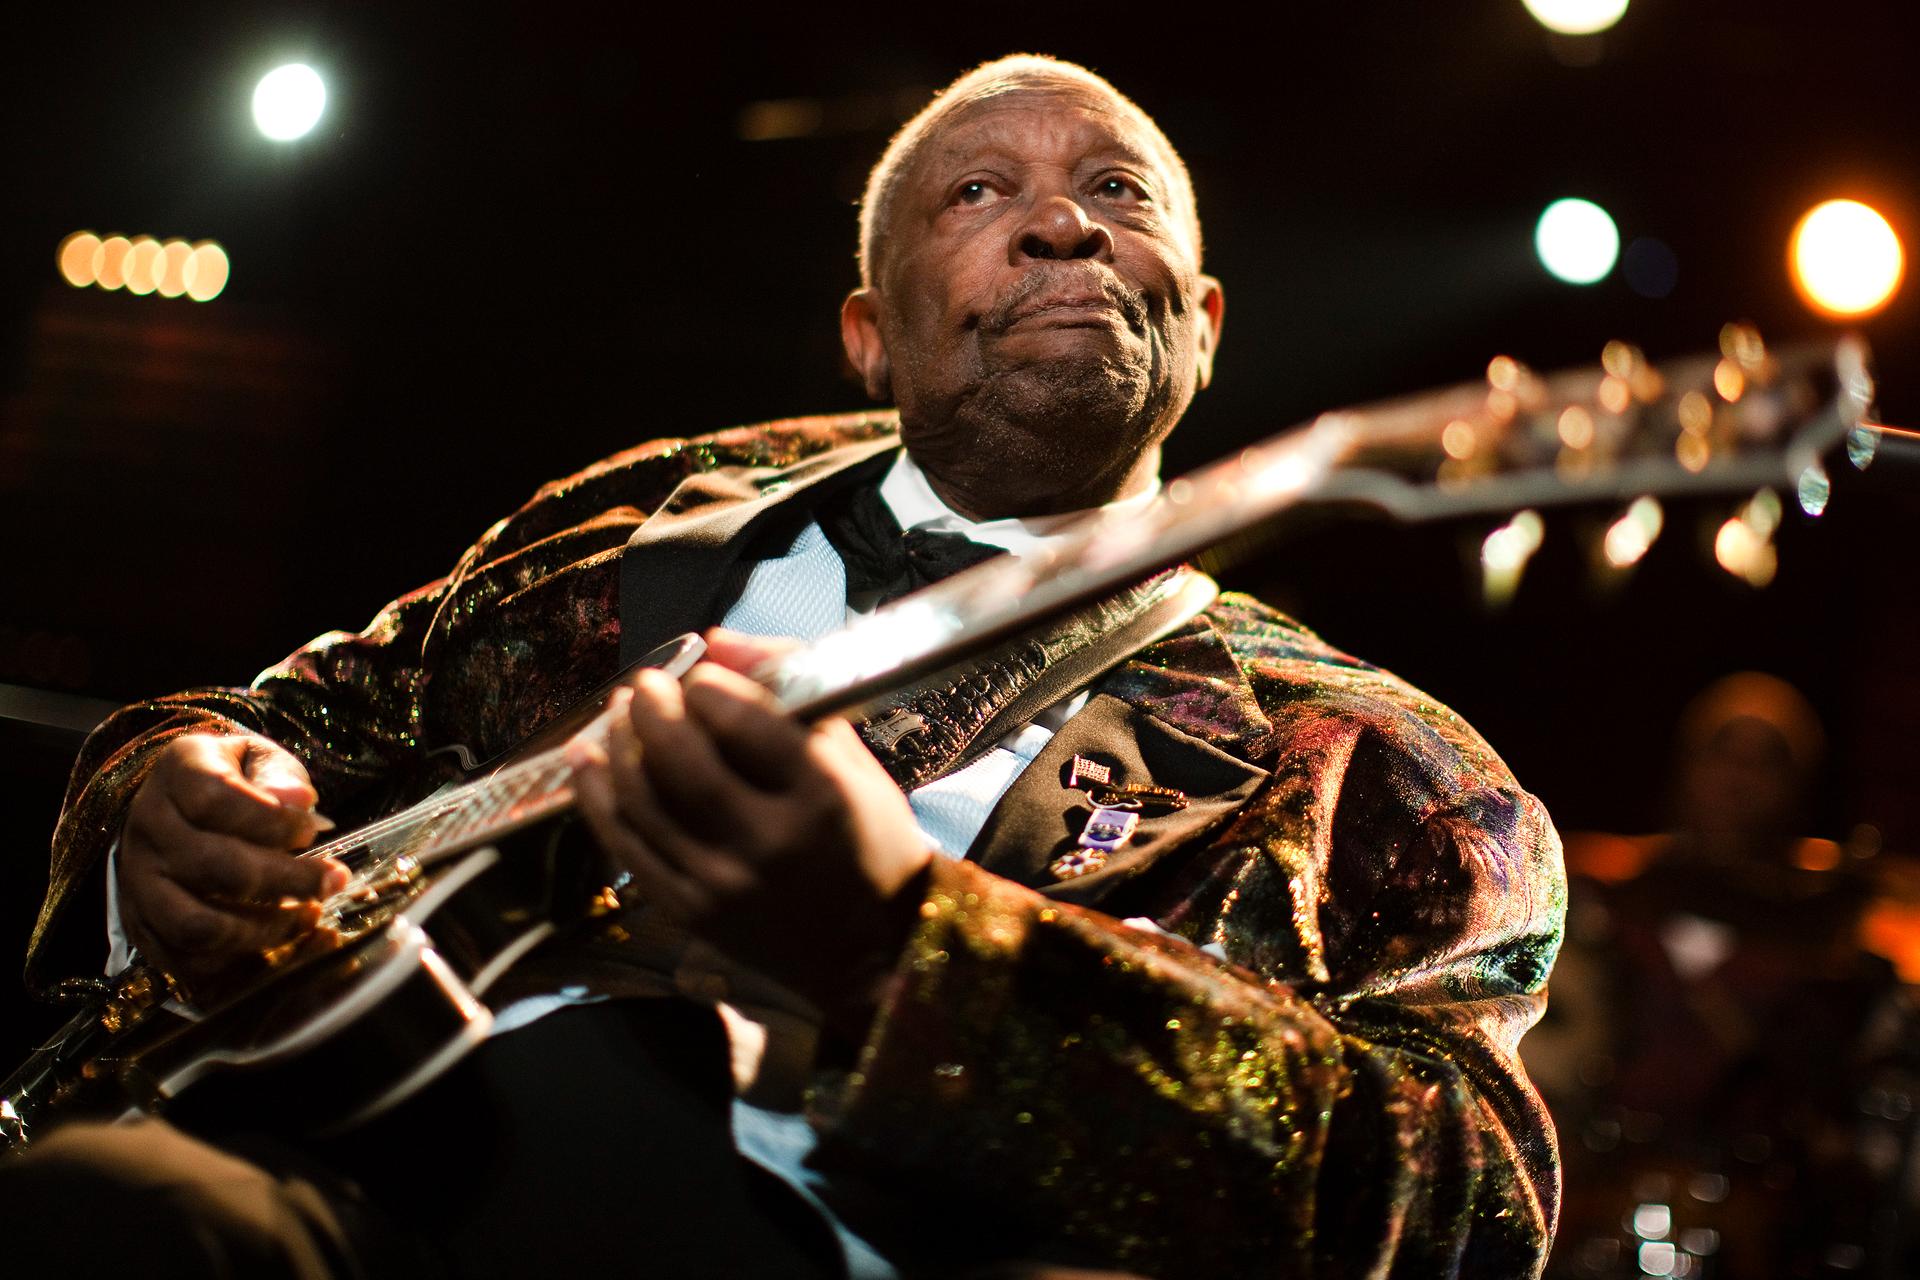 Blues legend B.B. King performs onstage during the 45th Montreux Jazz Festival in Montreux, Switzerland, on July 2, 2011. King died on May 15, 2015, at age 89.